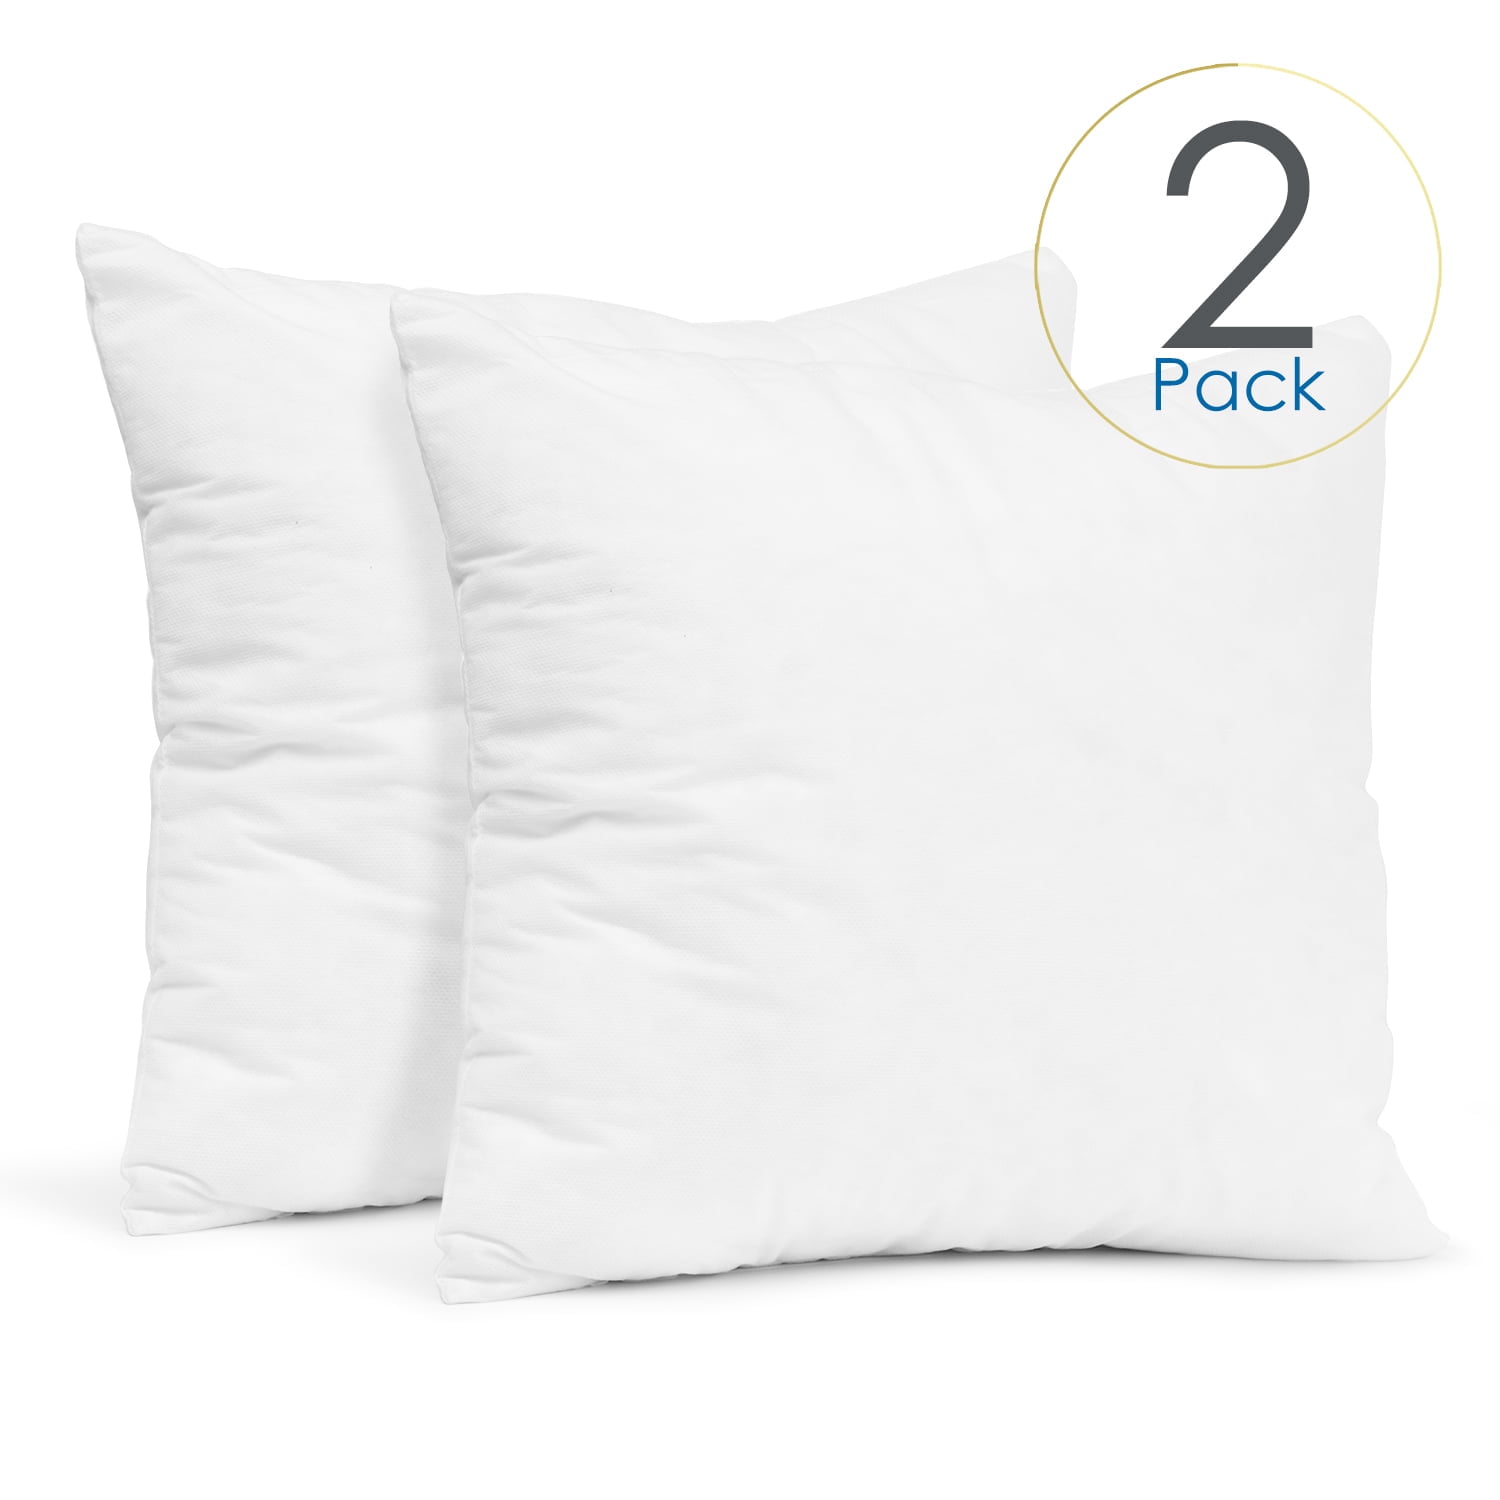 Utopia Bedding Throw Pillows Insert (Pack of 2, White) - 20 x 20 Inches Bed  and Couch Pillows - Indoor Decorative Pillows 